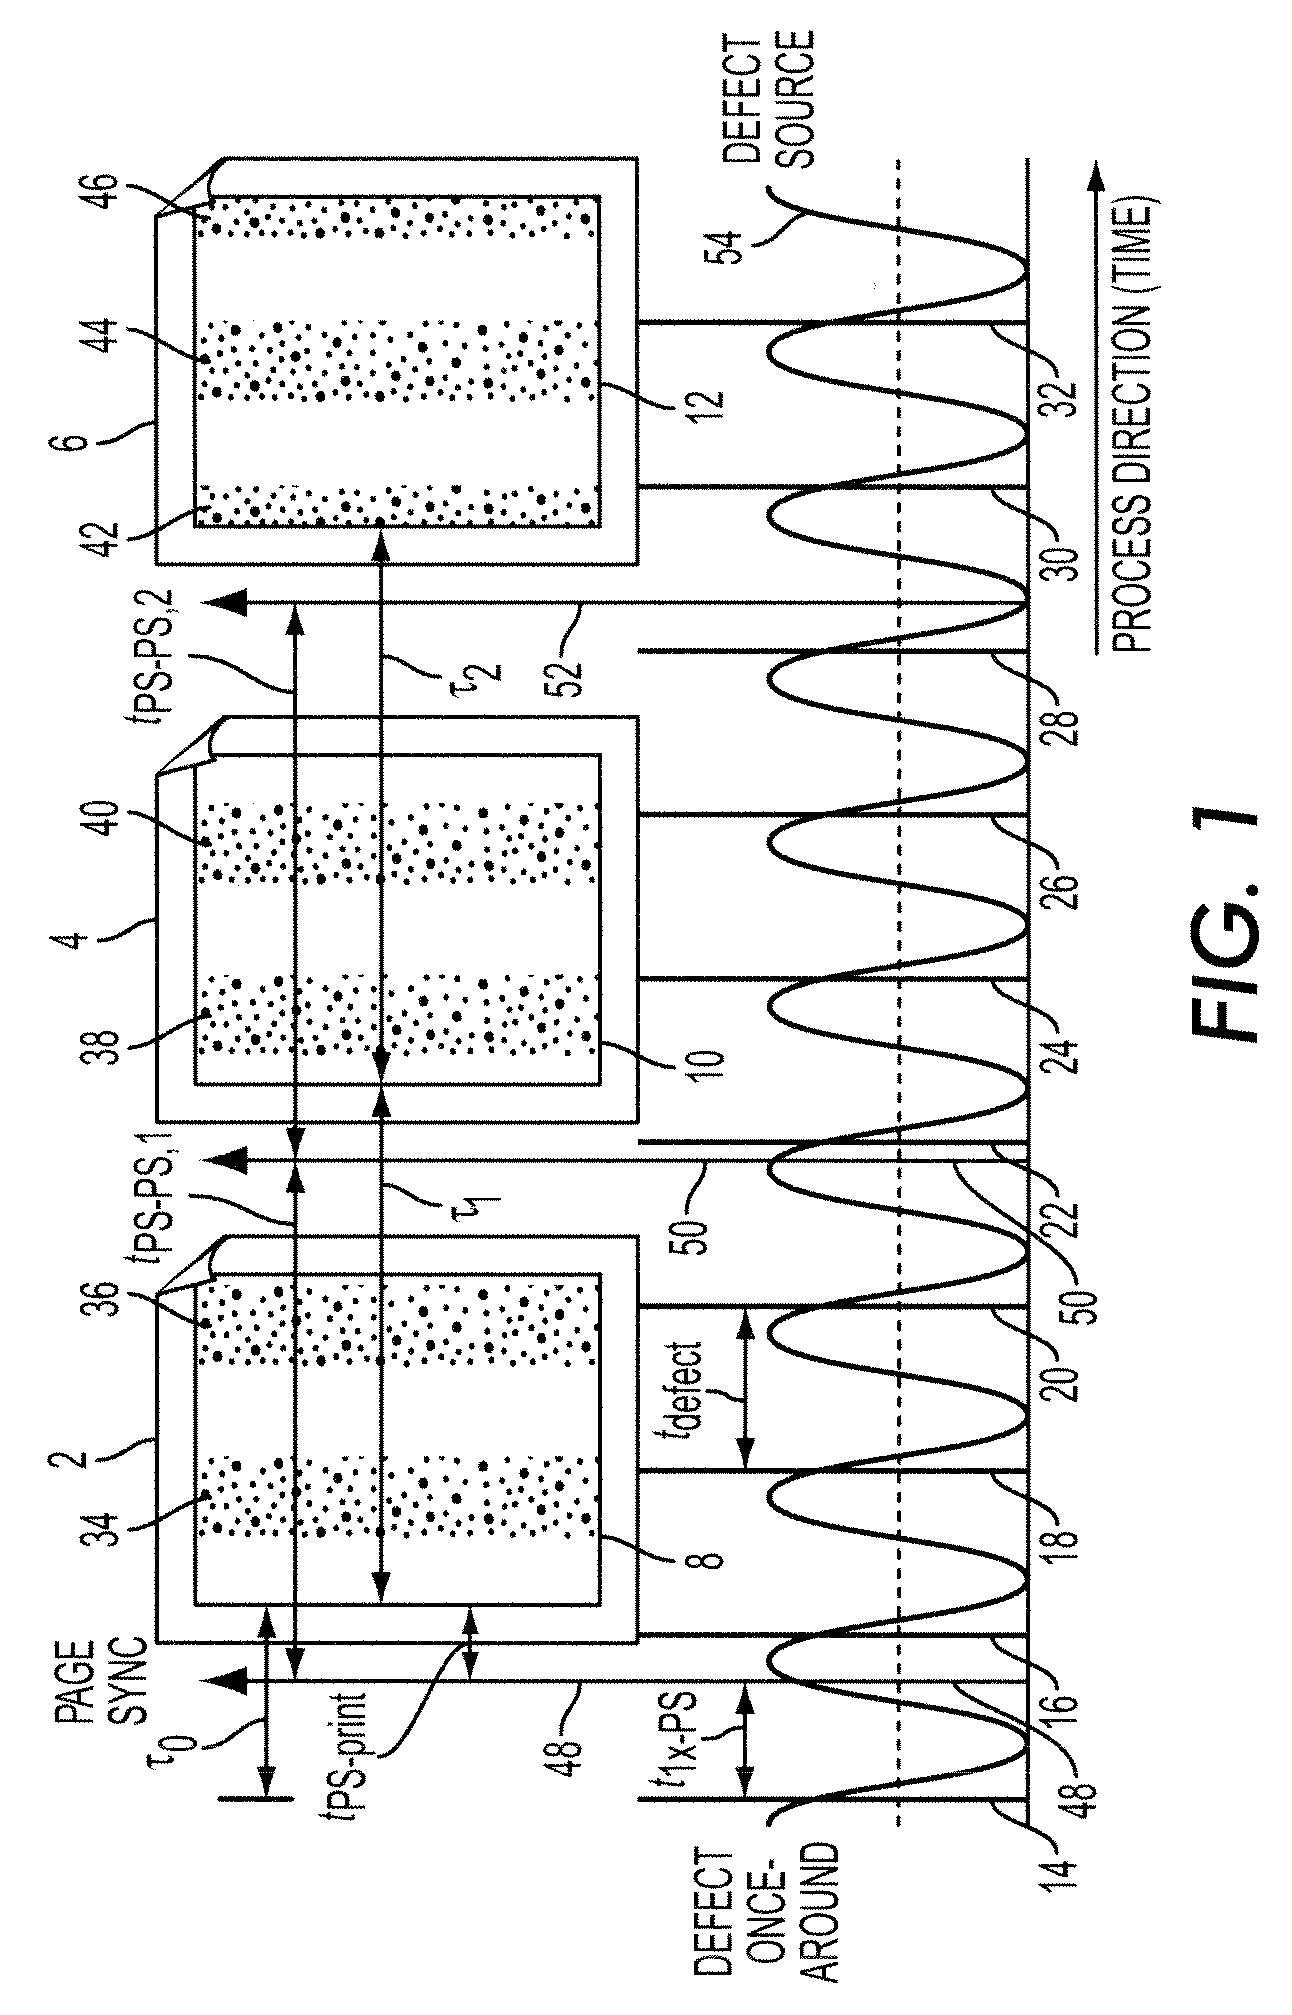 Method and system to compensate for banding defects